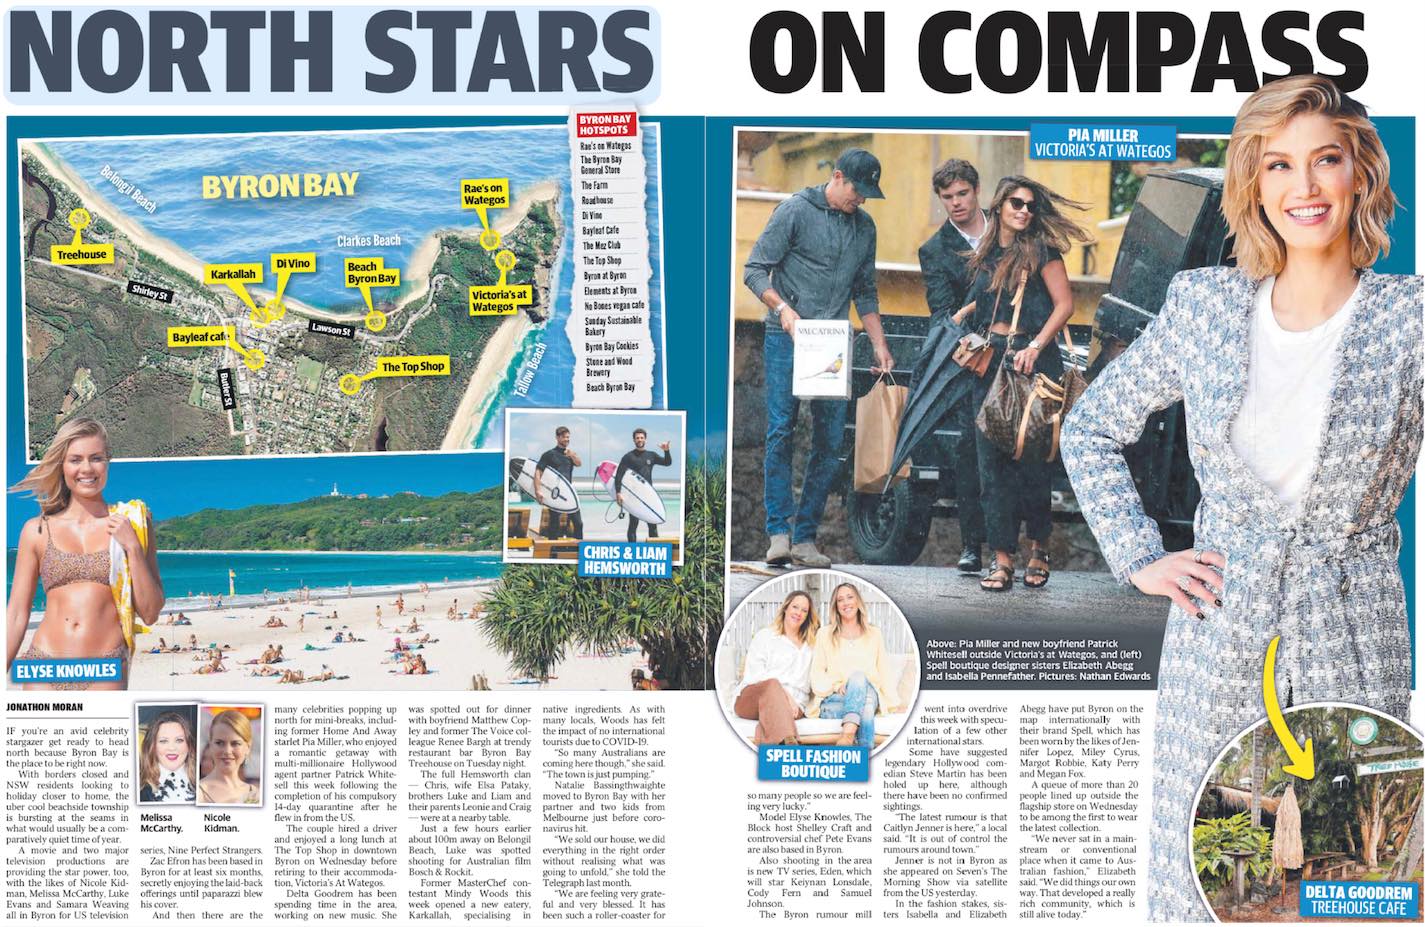 BR MEDIA NORTH STARS ON COMPASS The Daily Telegraph Page 18 19 11.09.2020